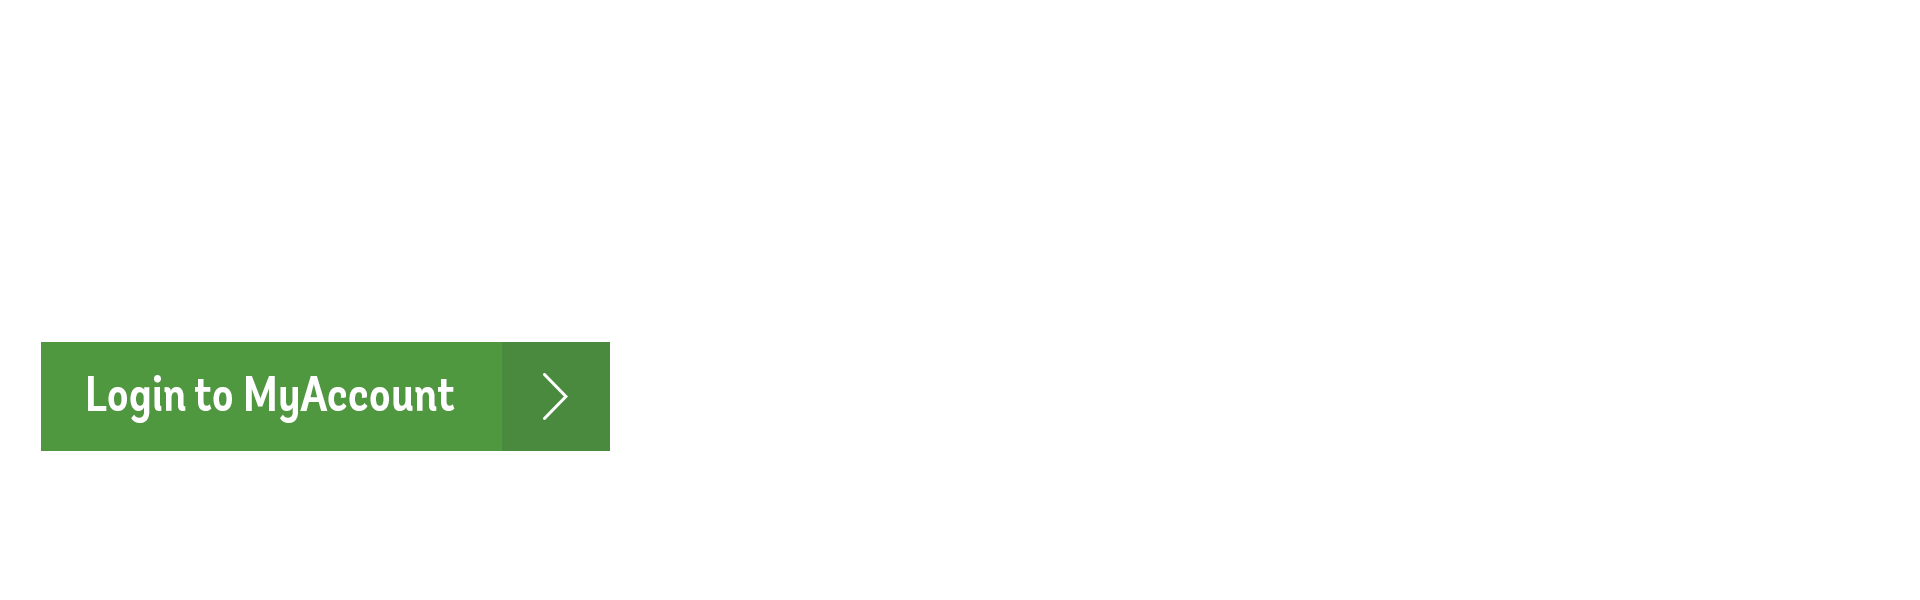 Want to change your plan or add a new service?